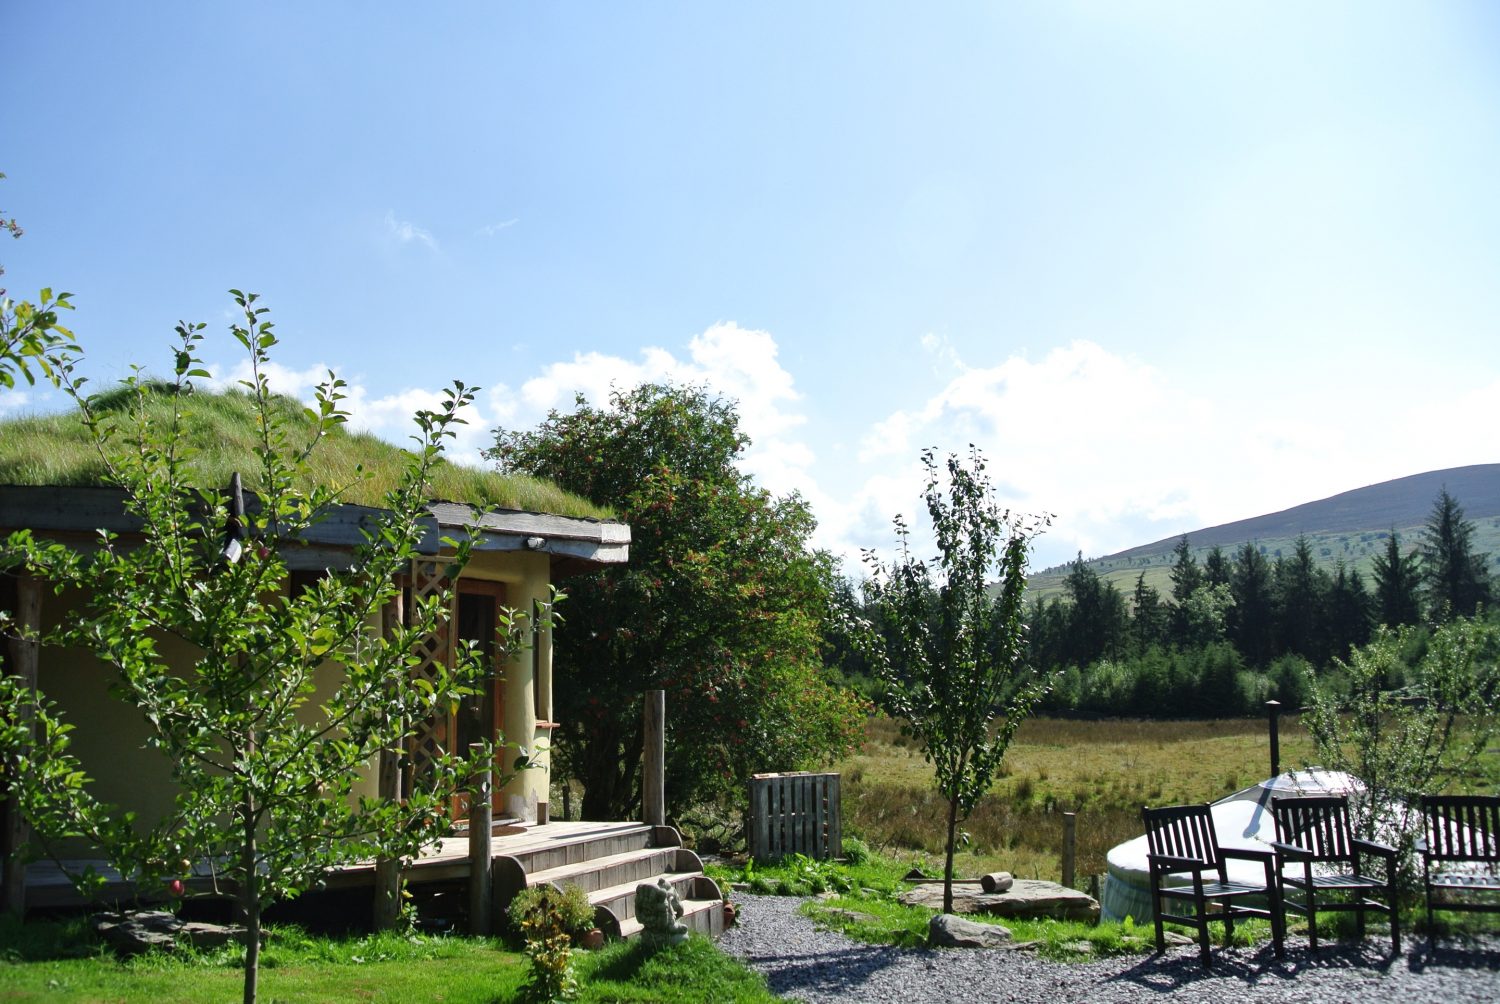 The roundhouse and Ty Crwn Mawr at the intimate off grid eco retreat centre Ty Mam Mawr